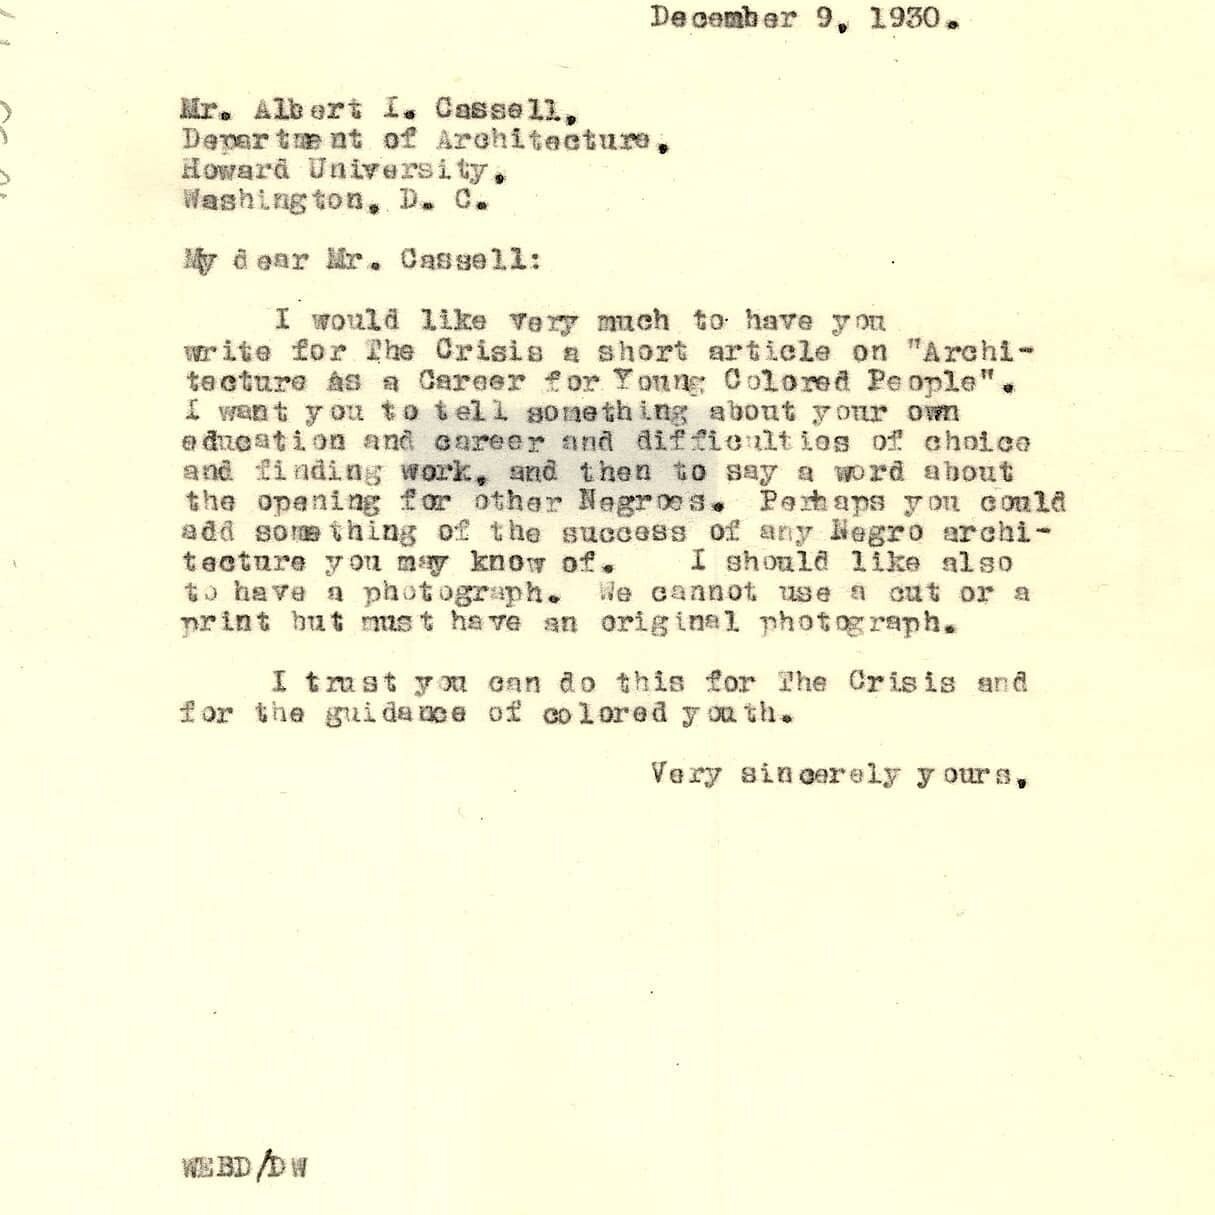 Today, we start off with a letter from WEB Dubois to yesterday's #BlackArchitect Albert Cassell, dated for December 9, 1930, imploring Cassell to share his experiences to young, up-and-coming Black Architects, which reads as follows:
.
&ldquo;My Dear